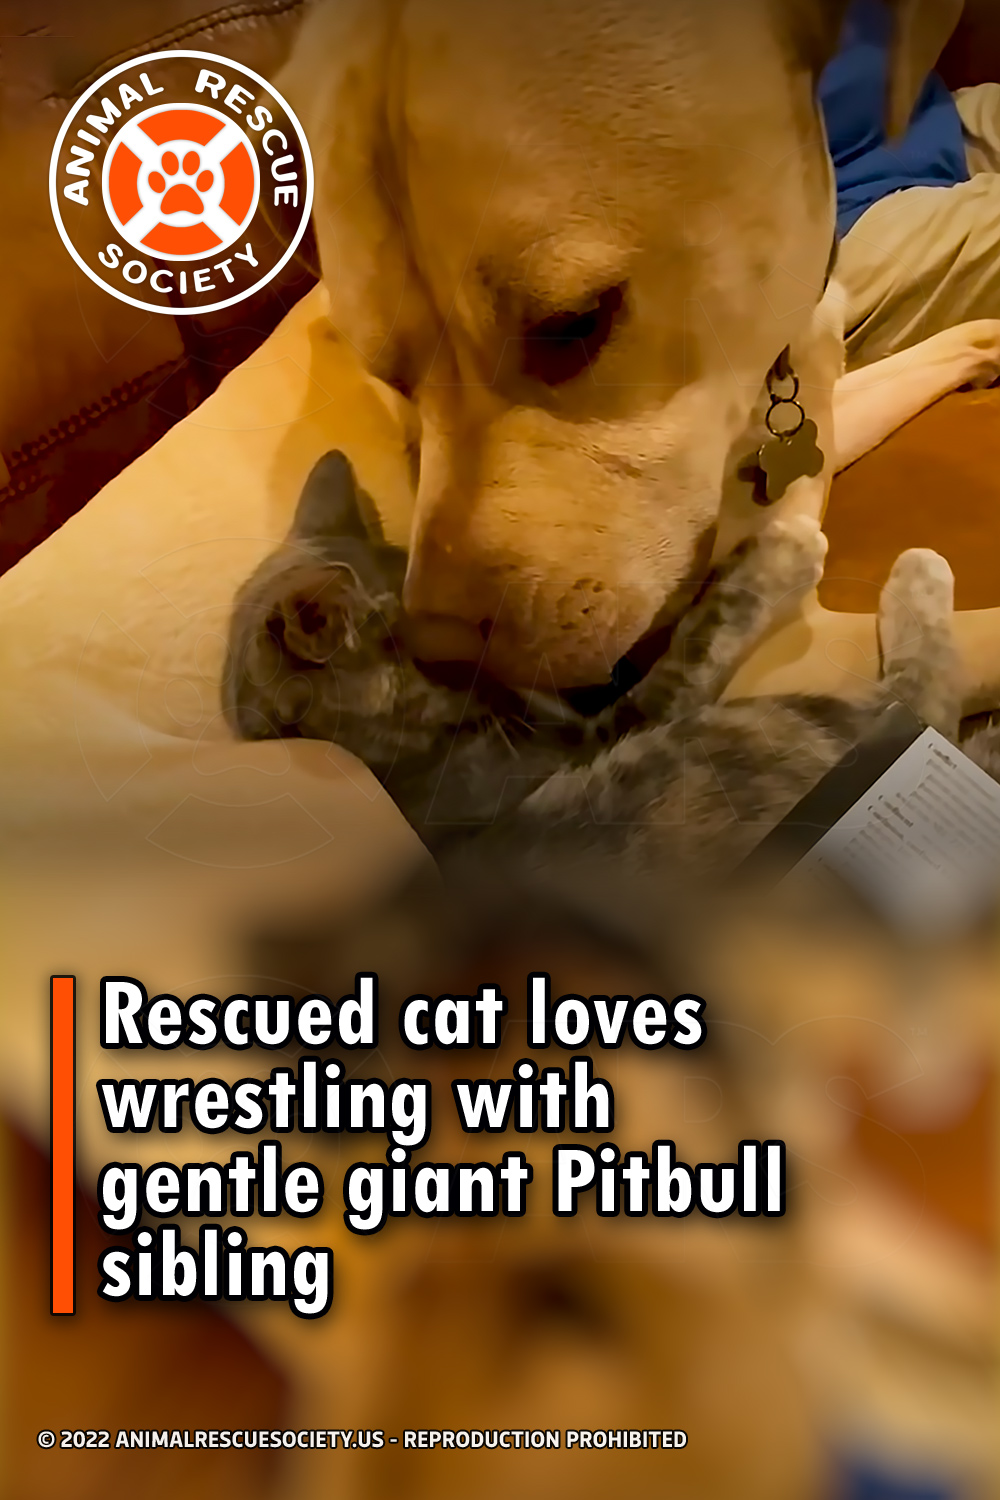 Rescued cat loves wrestling with gentle giant Pitbull sibling